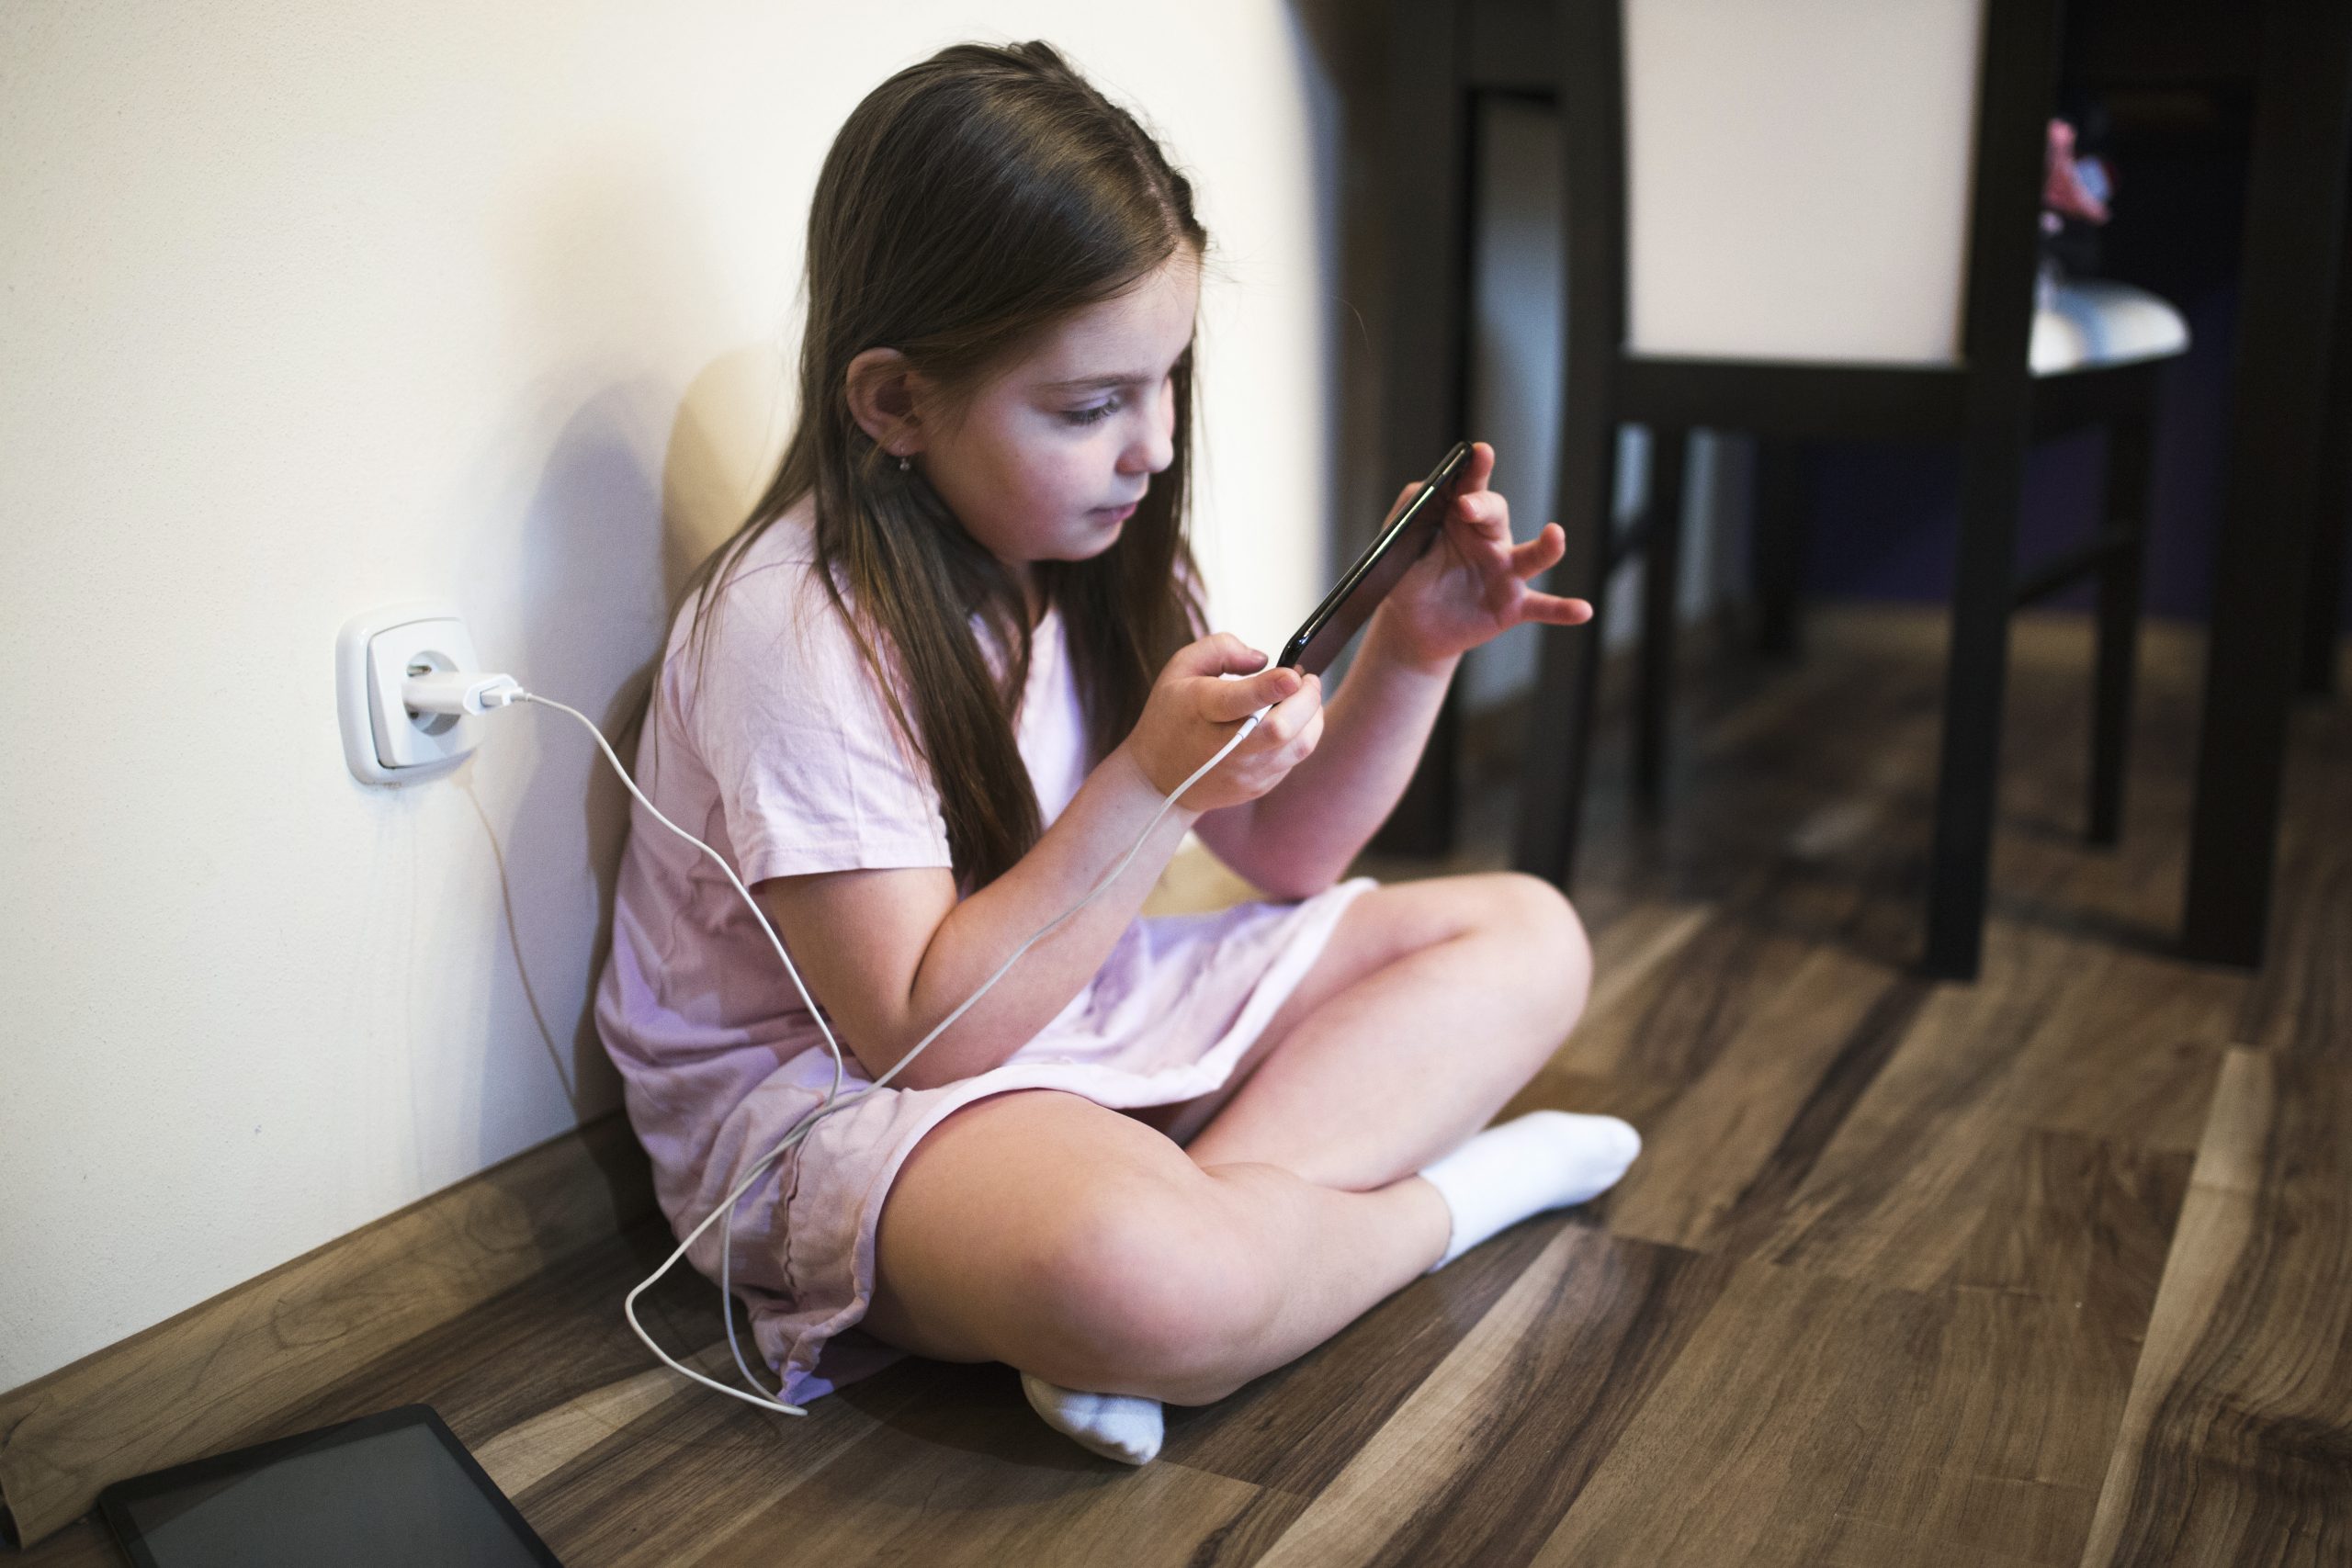 6 Tips How to talk with kids about cyberbullying